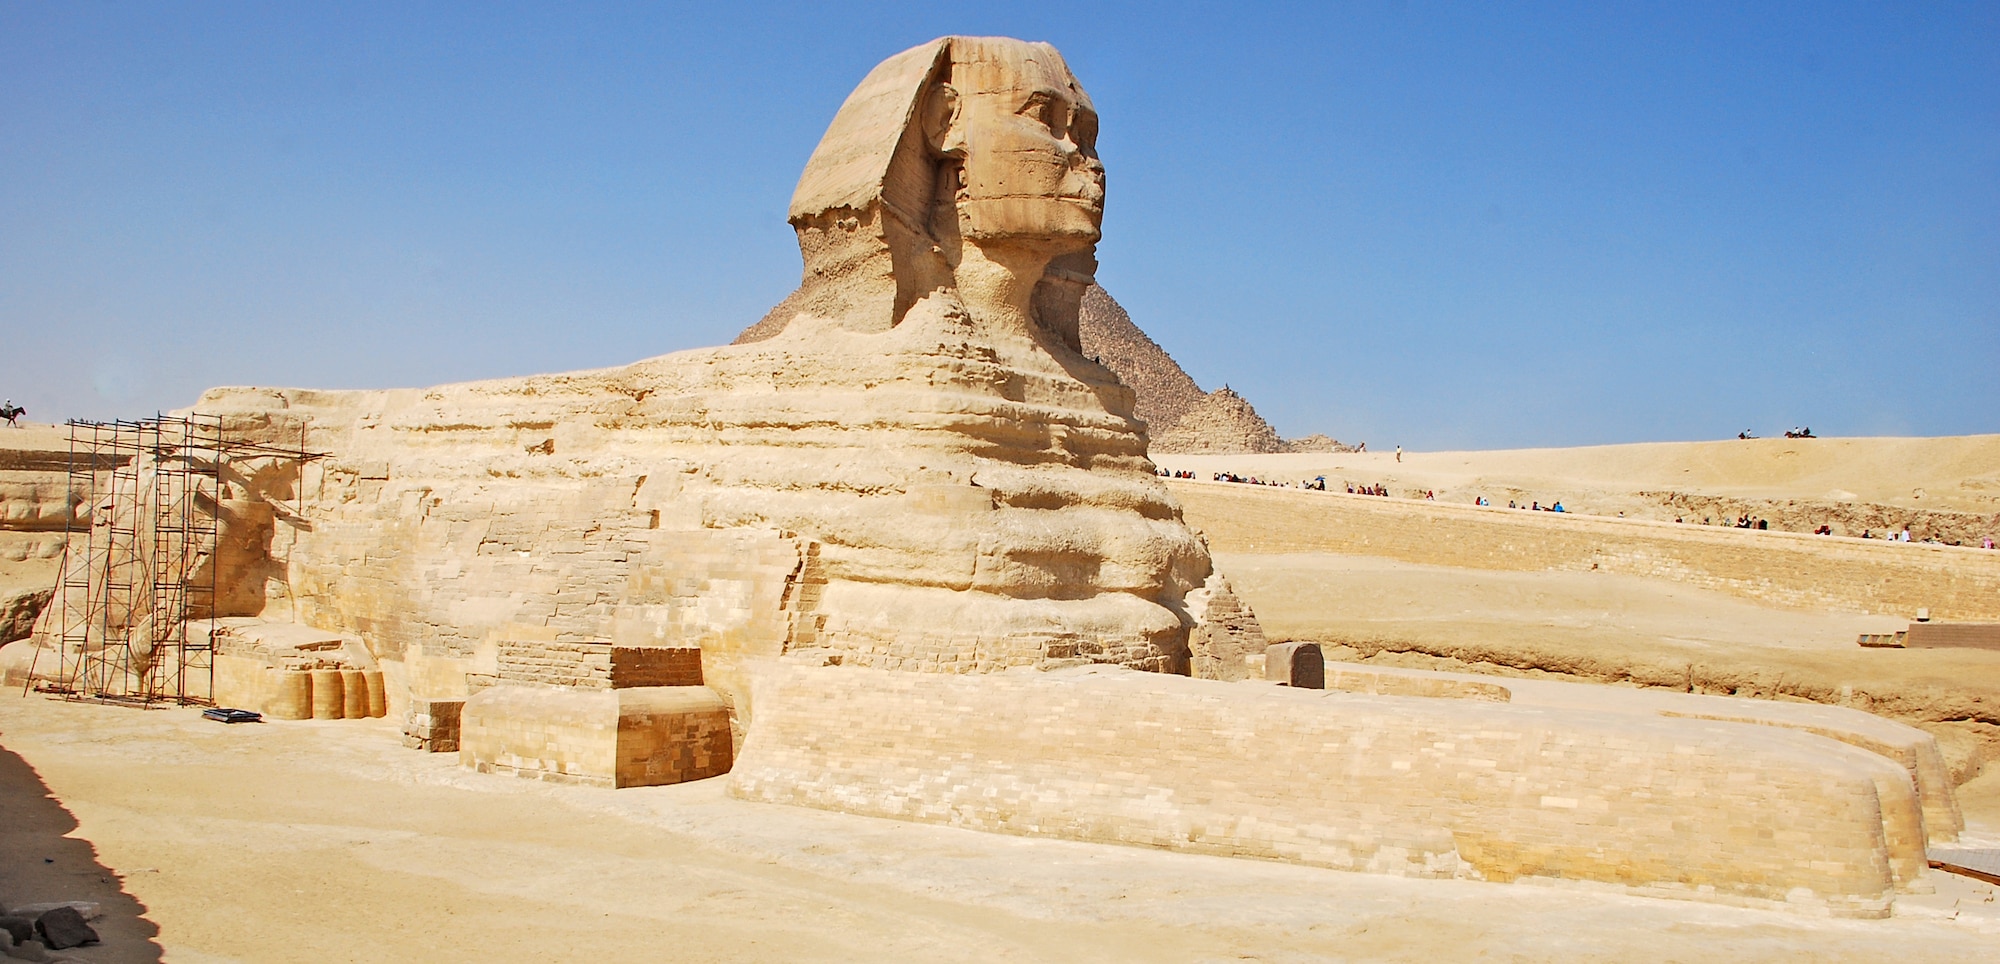 The Great Sphinx of Giza lies on the Giza Plateau with the famous Pyramids of Giza just in the distance, near Cairo, Egypt. The Sphinx is a statue of a reclining lion with a human head that is believed to have been built by ancient Egyptians between 2555 B.C. and 2523 B.C. It is one of the most famous and recognizable pieces of history in the Cairo area. (U.S. Air Force photo/Senior Airman Sara Csurilla)